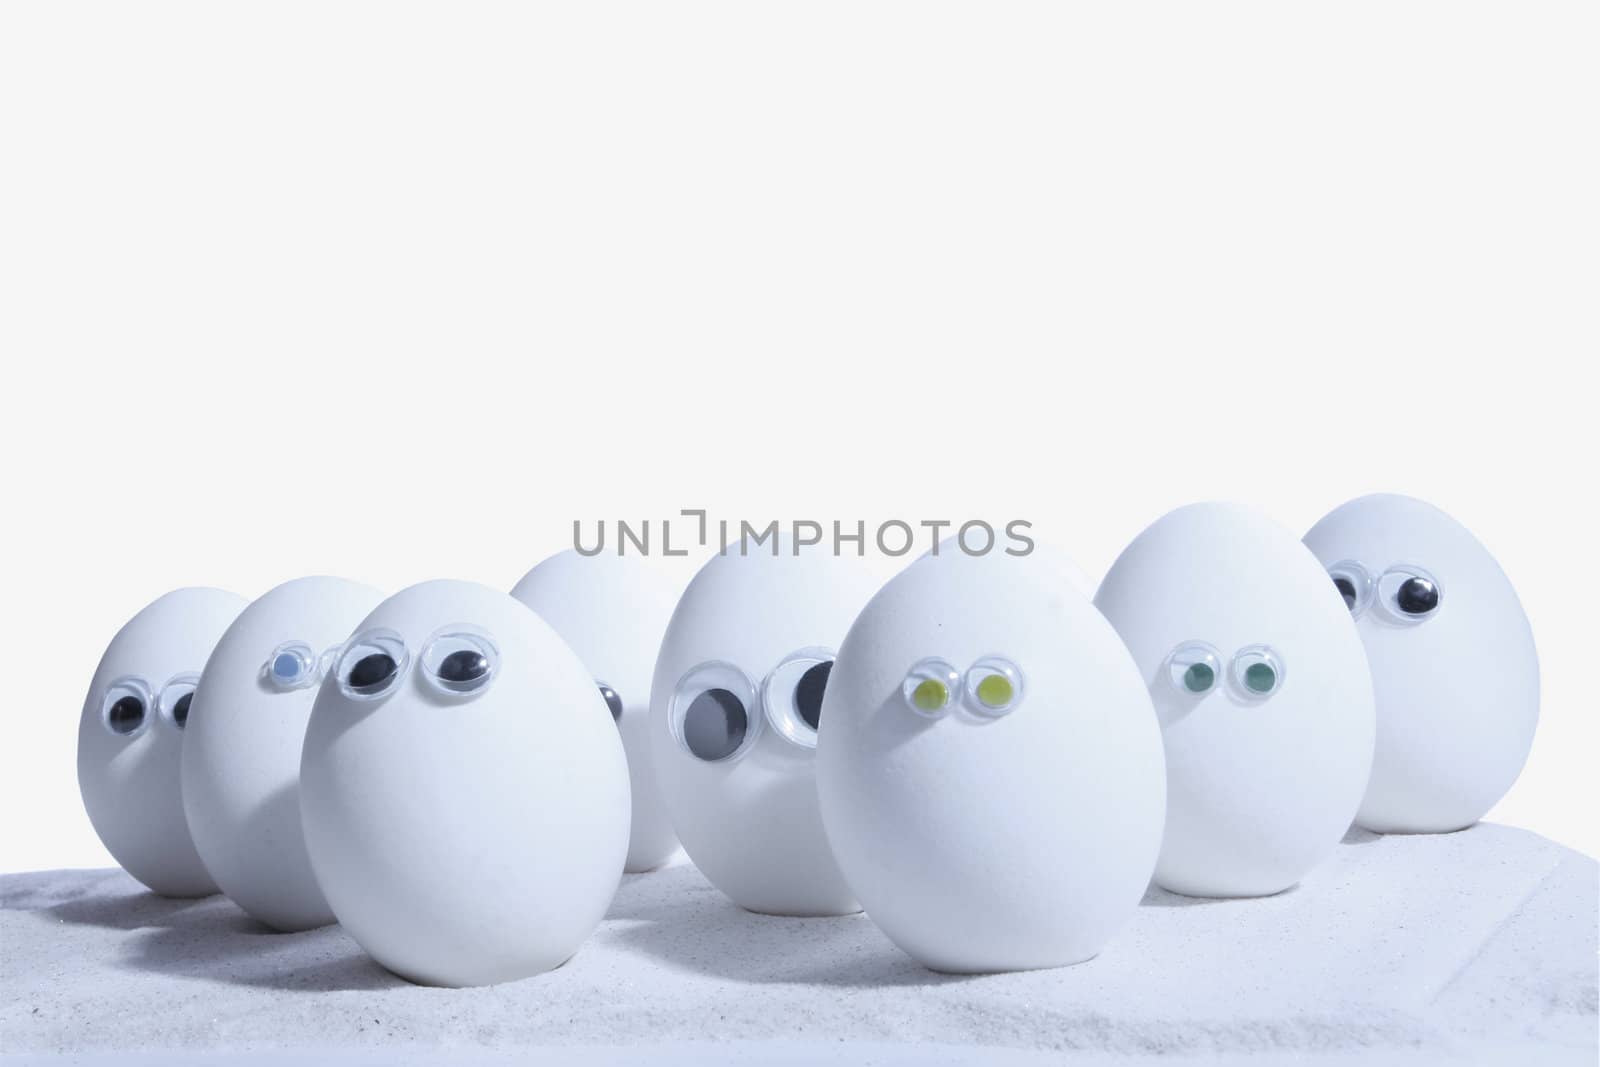 Eggs with eyeballs, lined up in row, Egg people. Add your own expressions